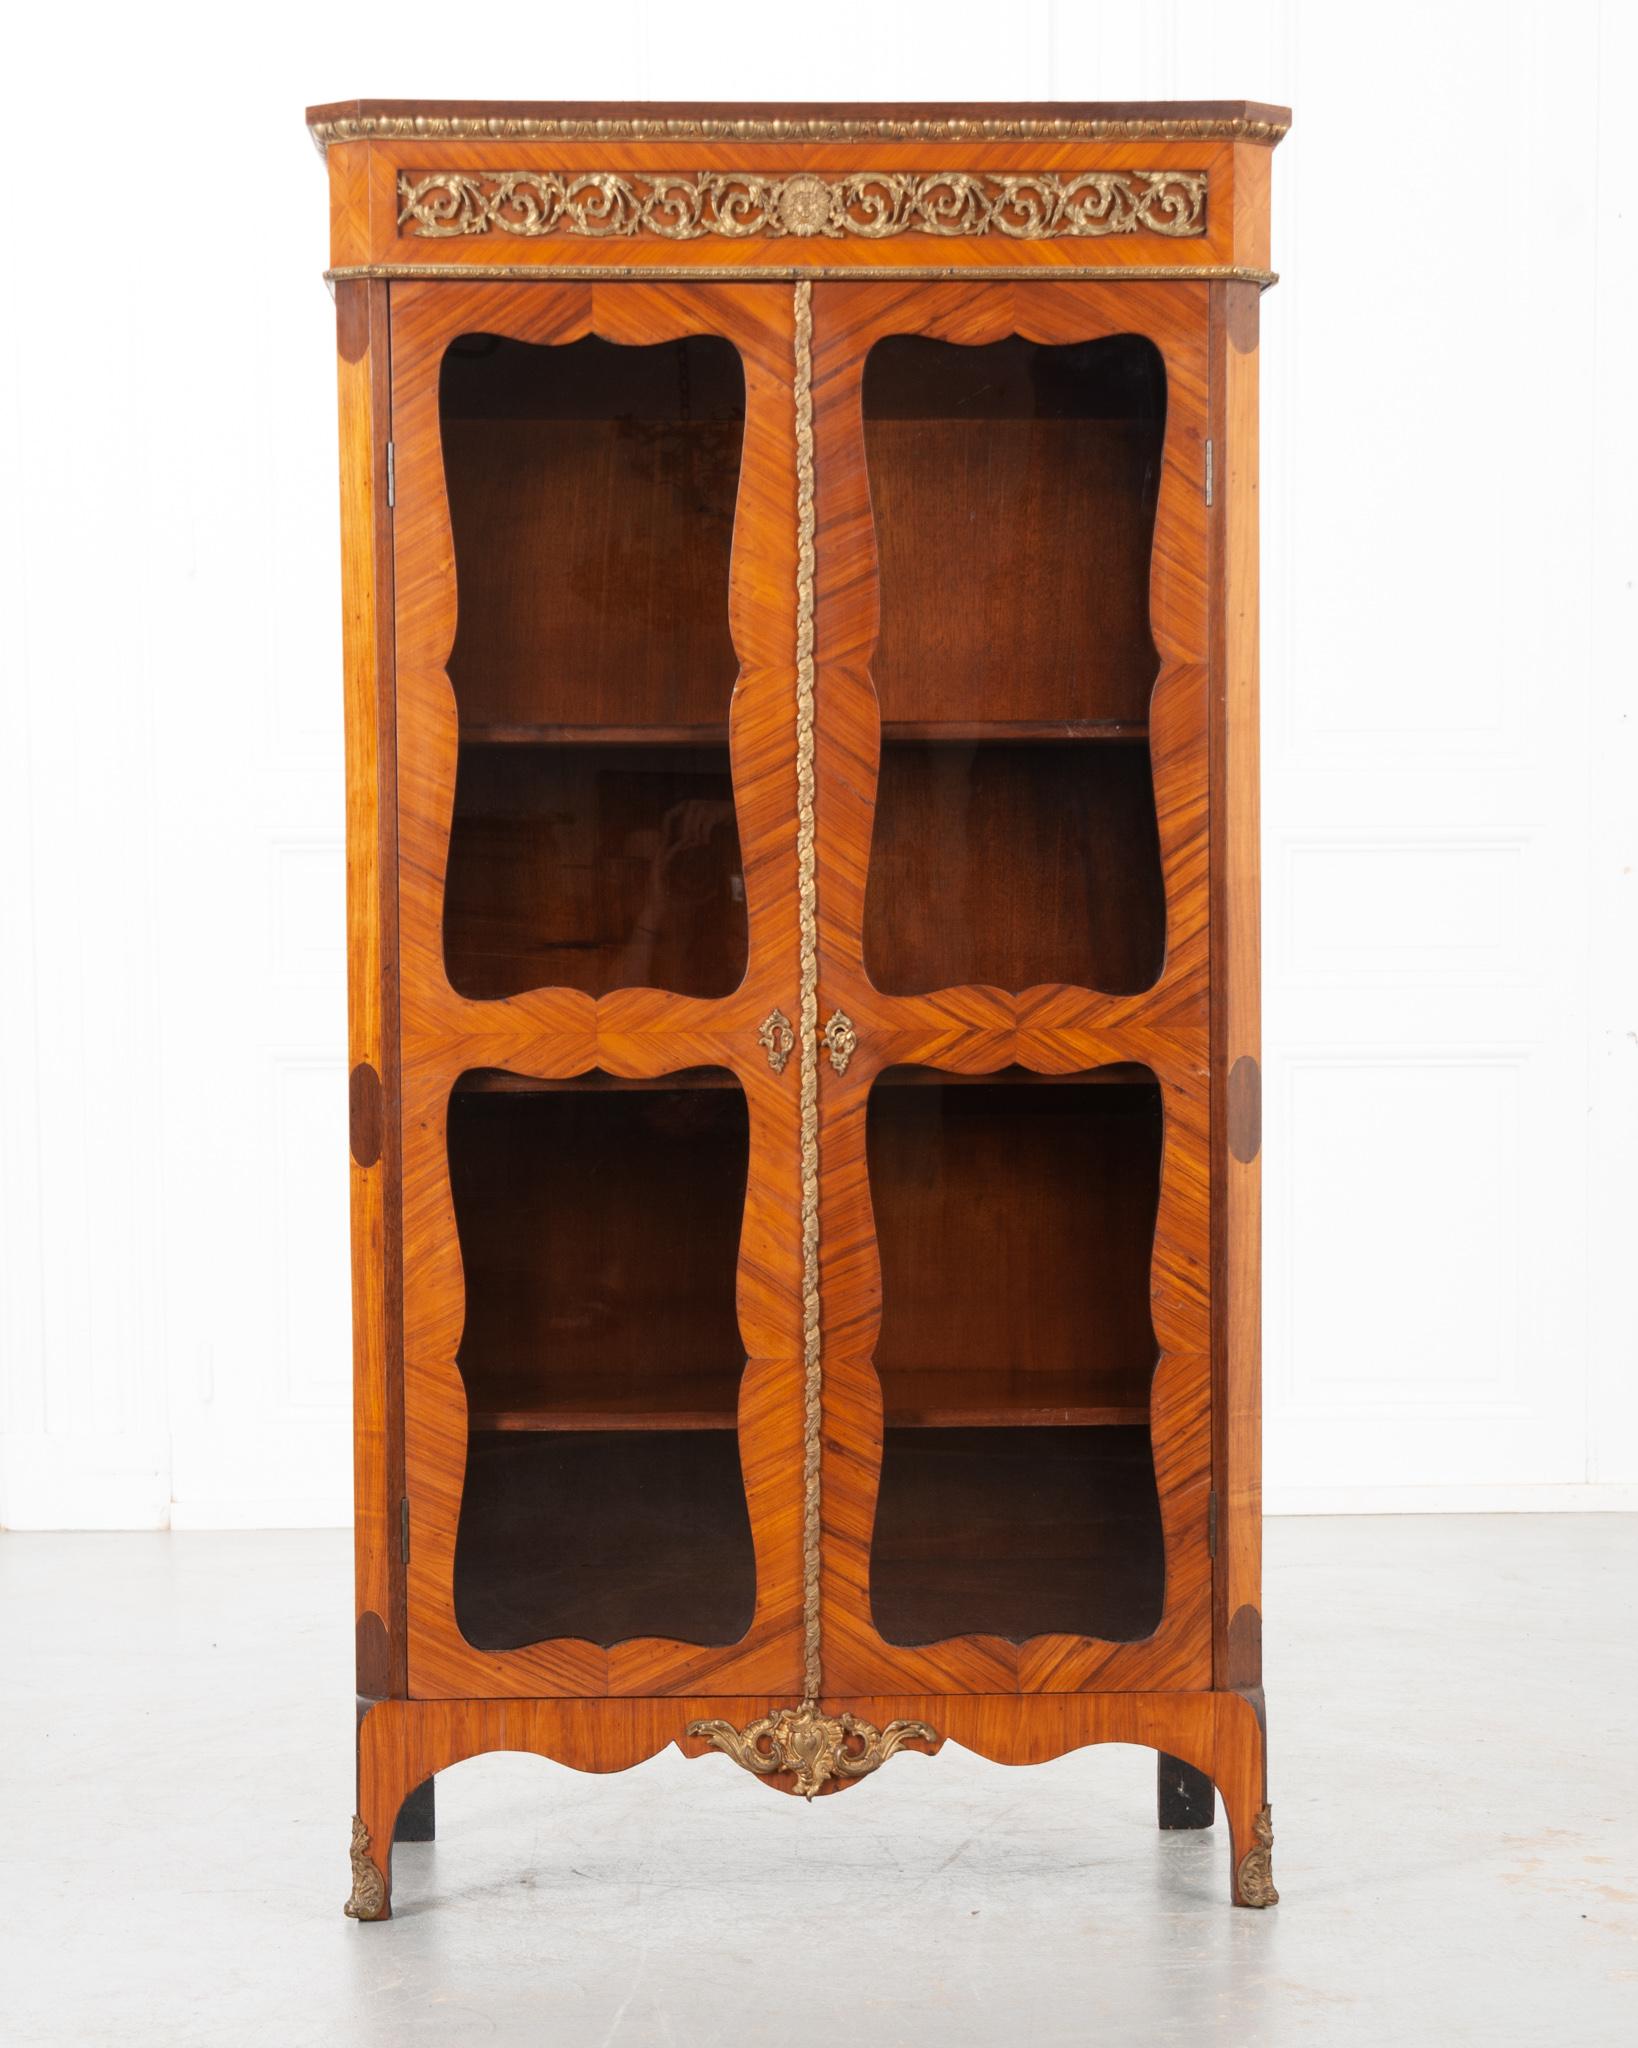 This stunning vitrine is dripping with antique elegance and character! Made in the style of Louis XVI in France circa early 1900’s. The incredible bookmatched veneer has gained a vibrant patina over the last more than a century. Although petite,